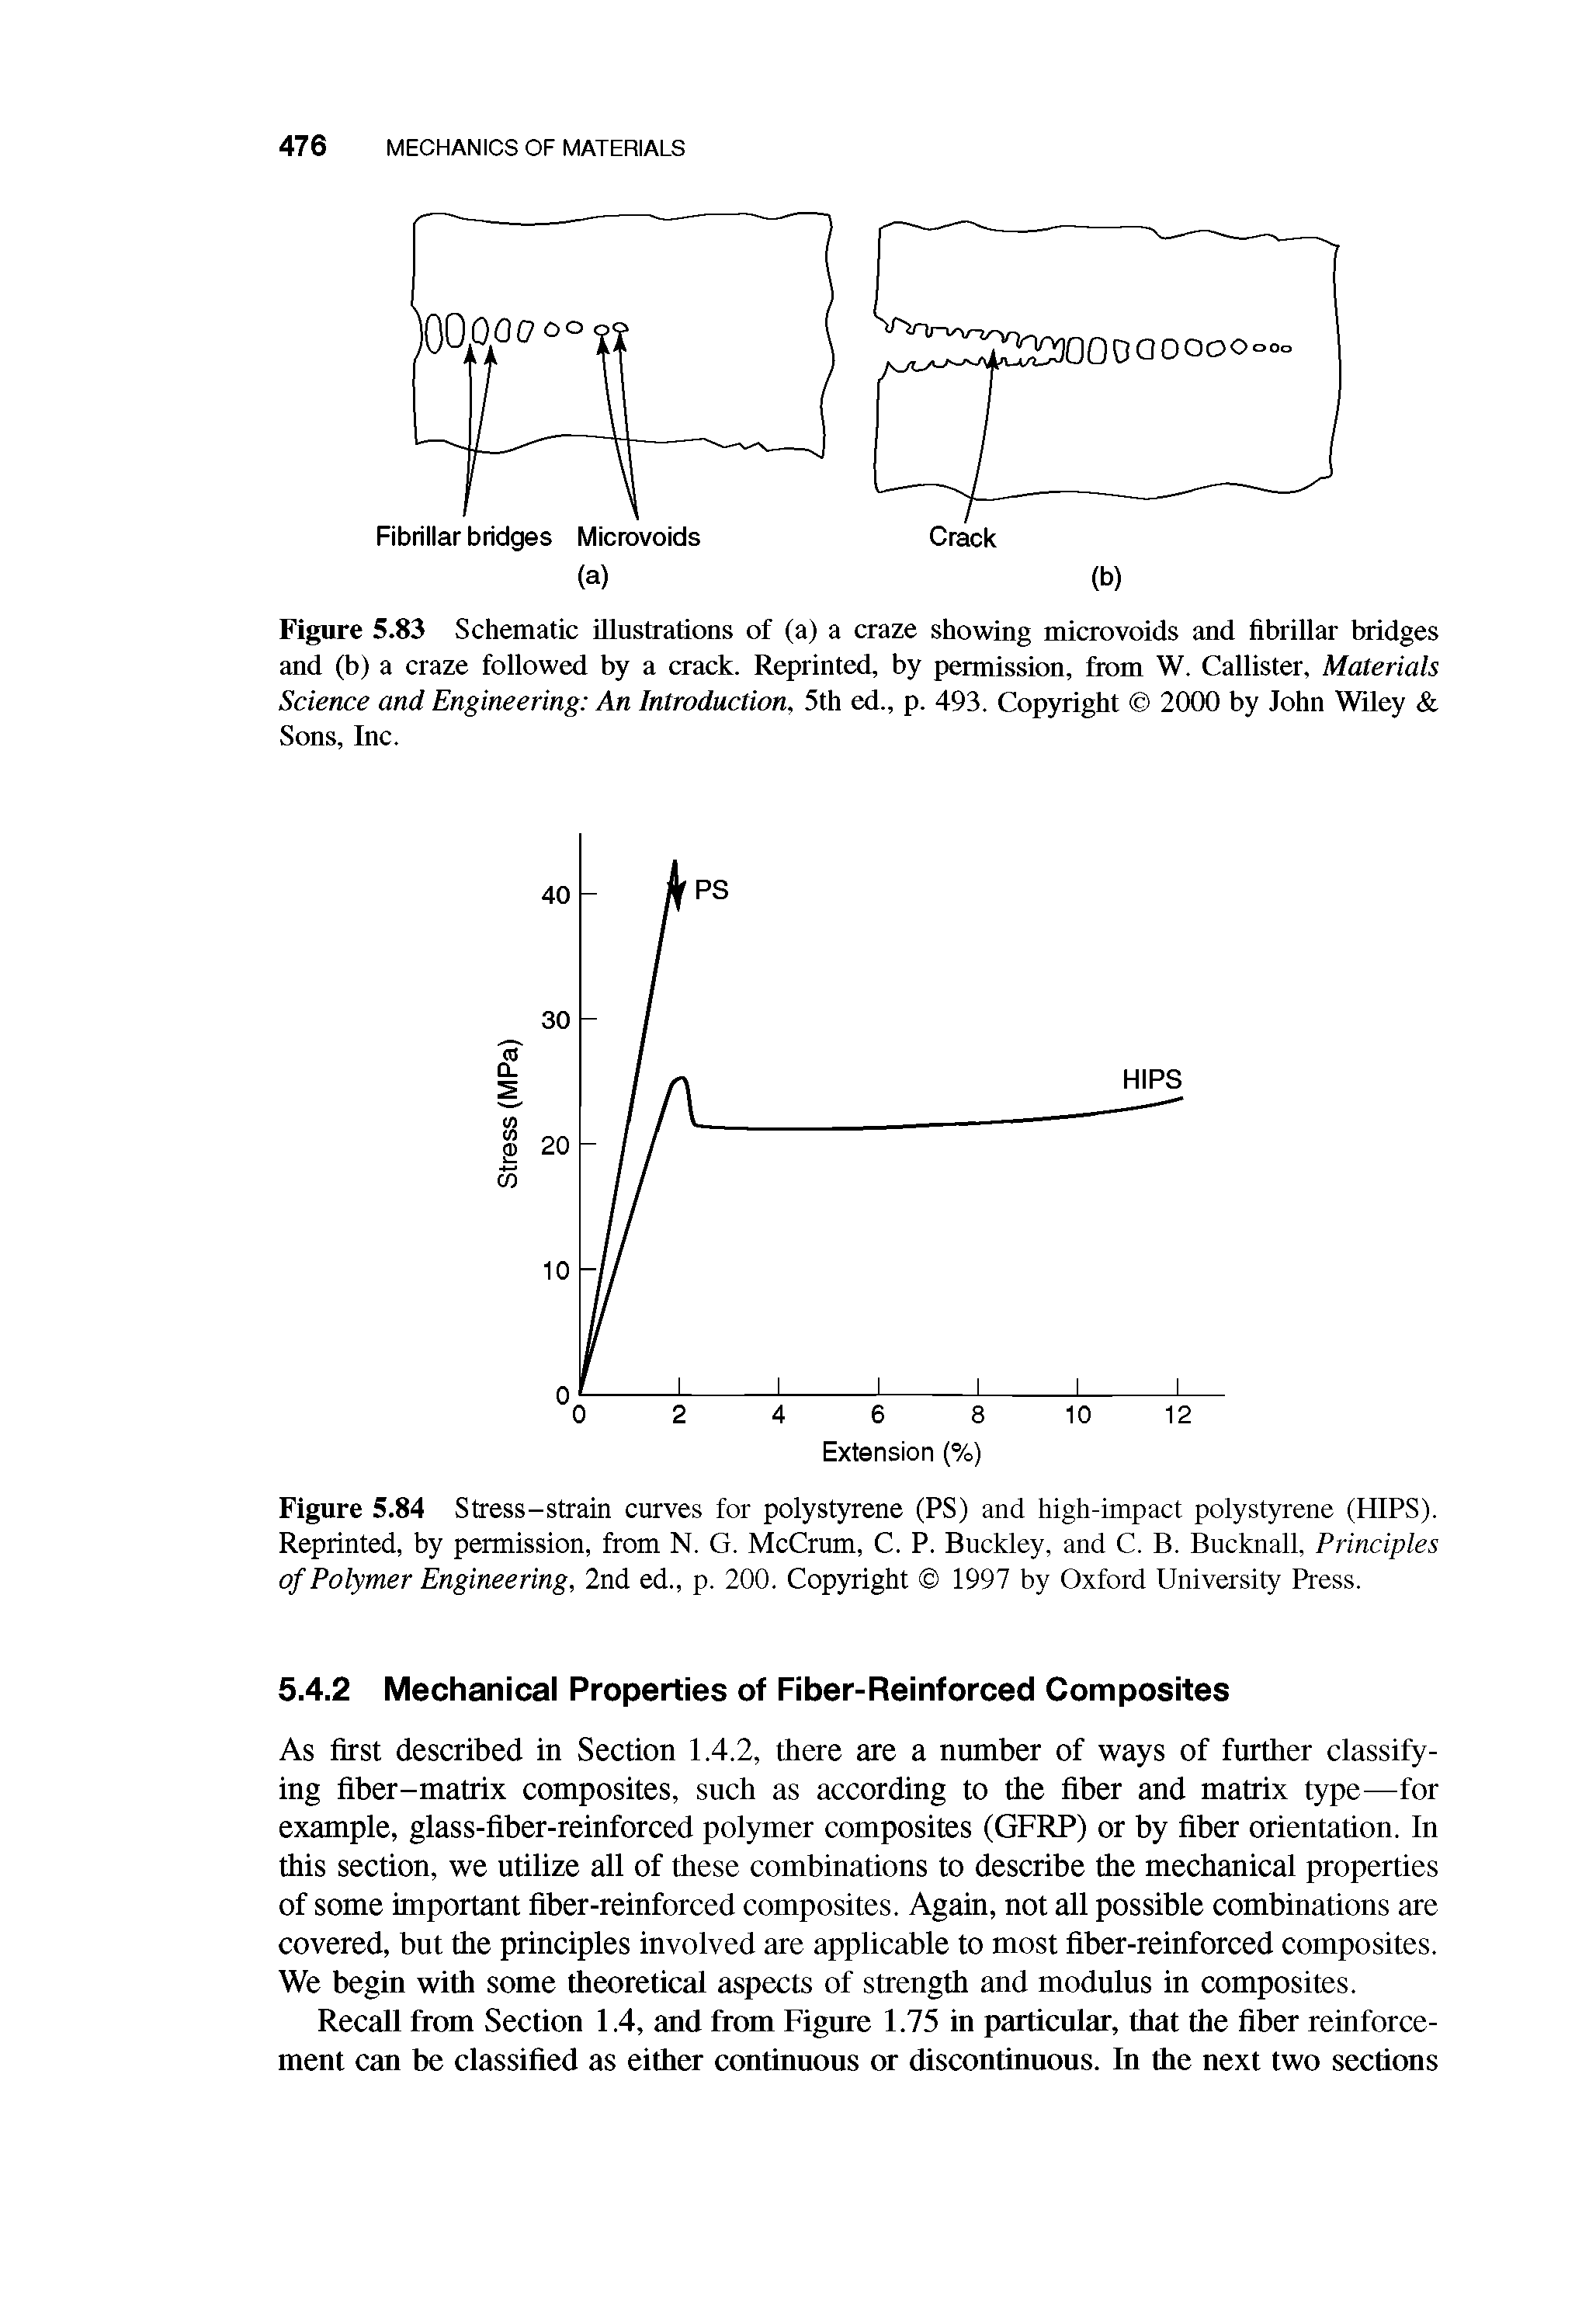 Figure 5.84 Stress-strain curves for polystyrene (PS) and high-impact polystyrene (HIPS). Reprinted, by permission, from N. G. McCrum, C. P. Buckley, and C. B. Bucknall, Principles of Polymer Engineering, 2nd ed., p. 200. Copyright 1997 by Oxford University Press.